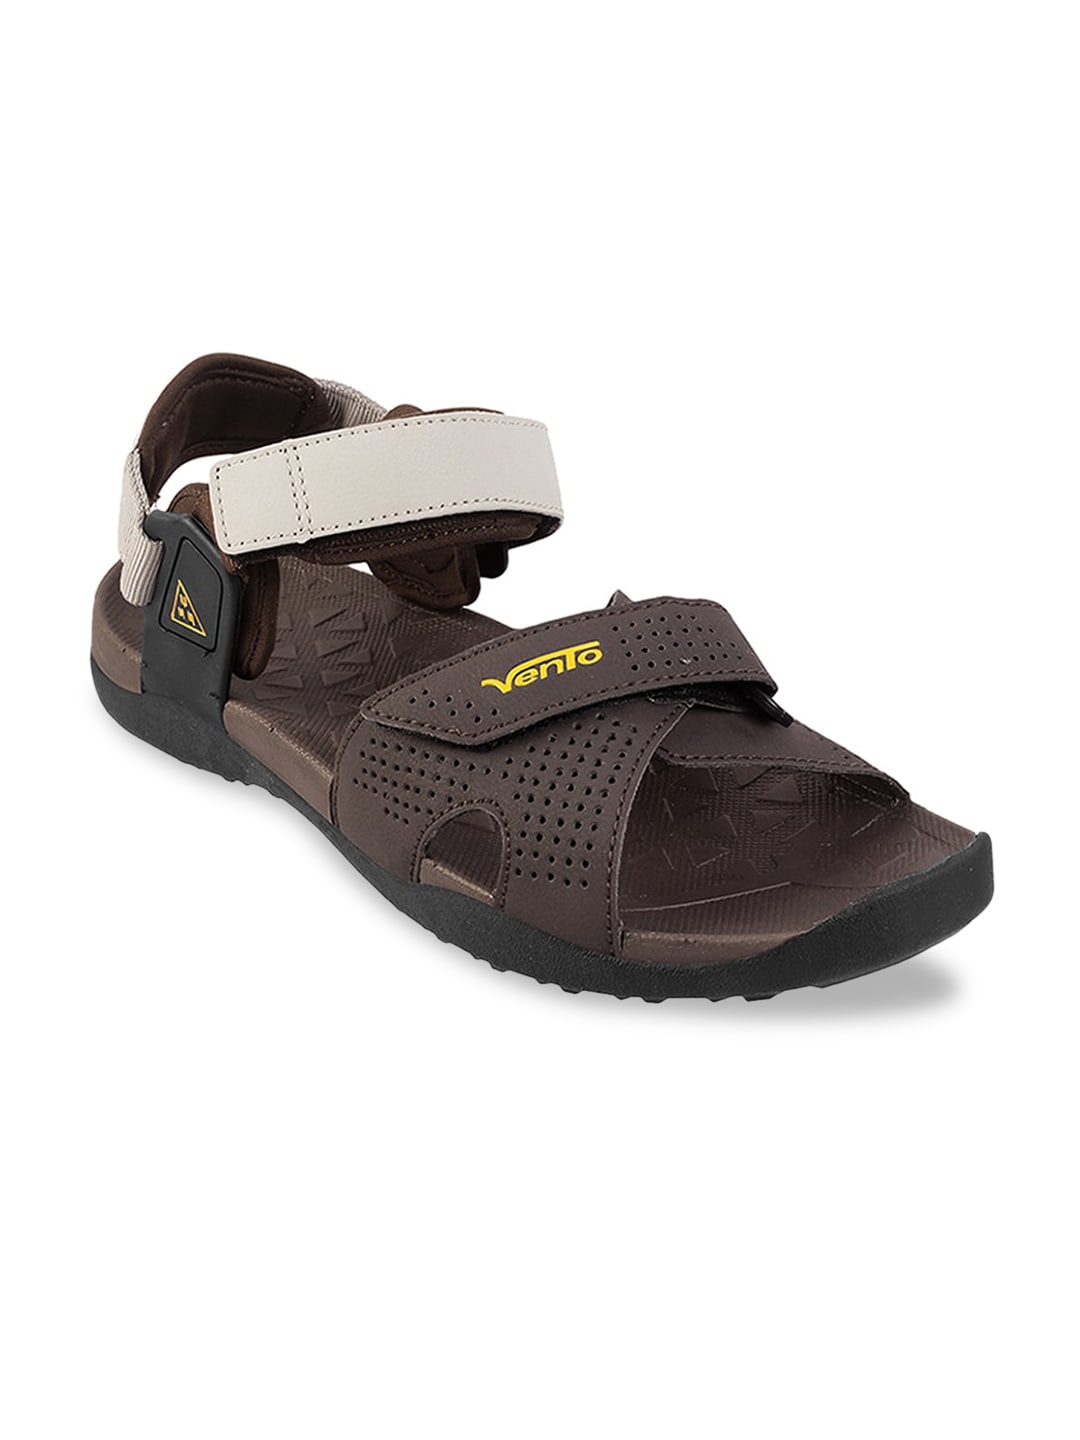 Vento Unisex Brown & Yellow Solid Sports Sandals Price in India